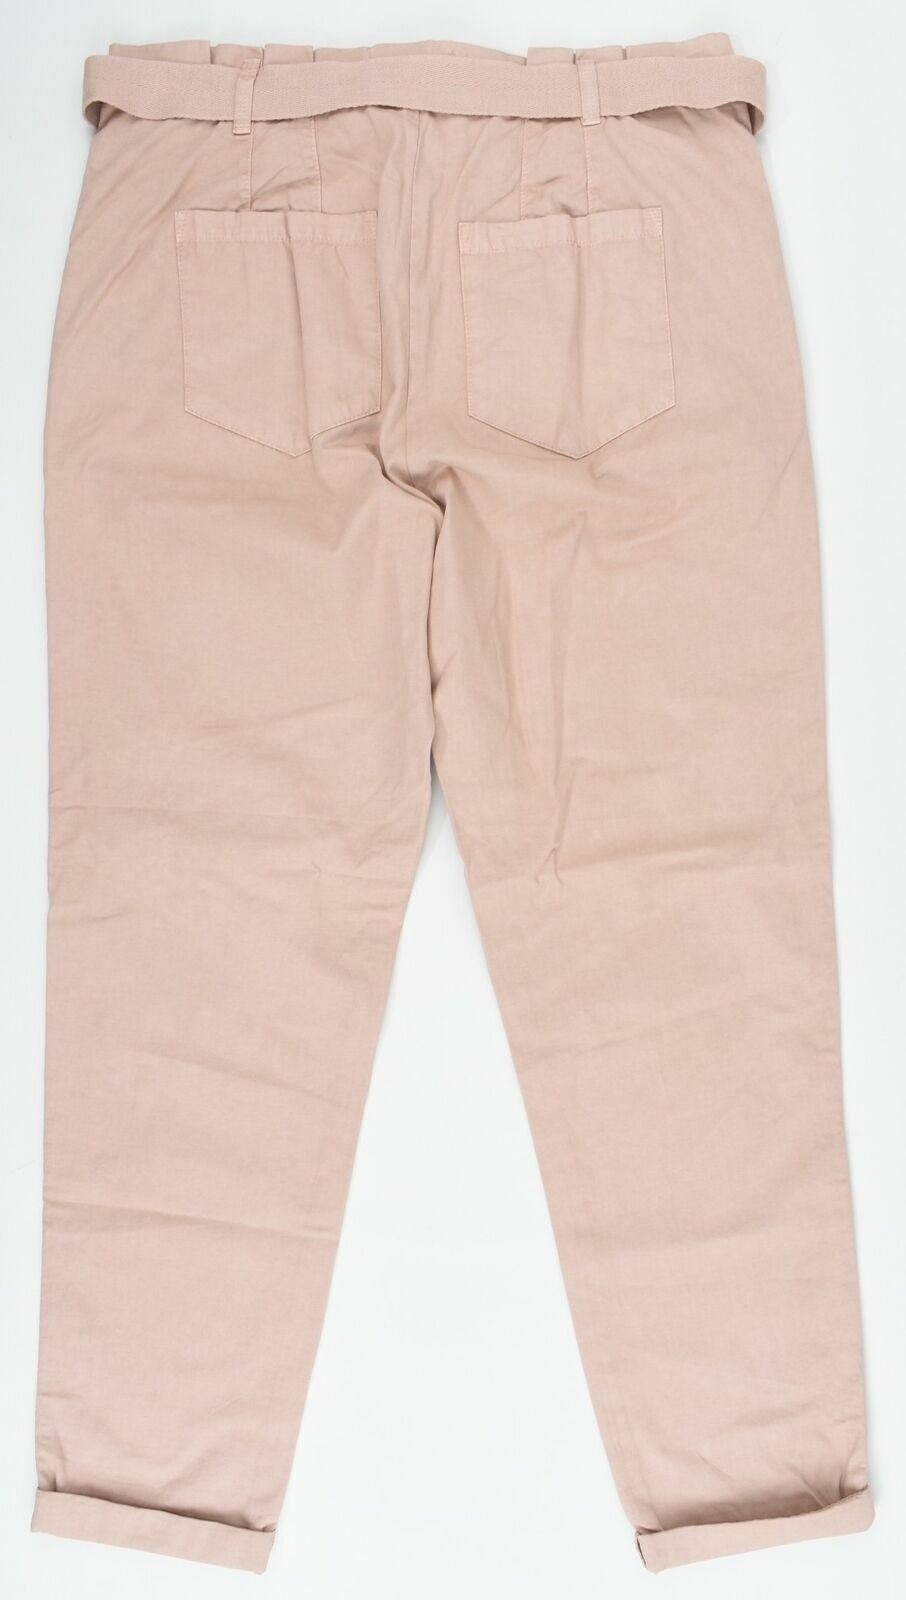 NEXT Women's Light Brown Relaxed Fit Trousers- UK 12R